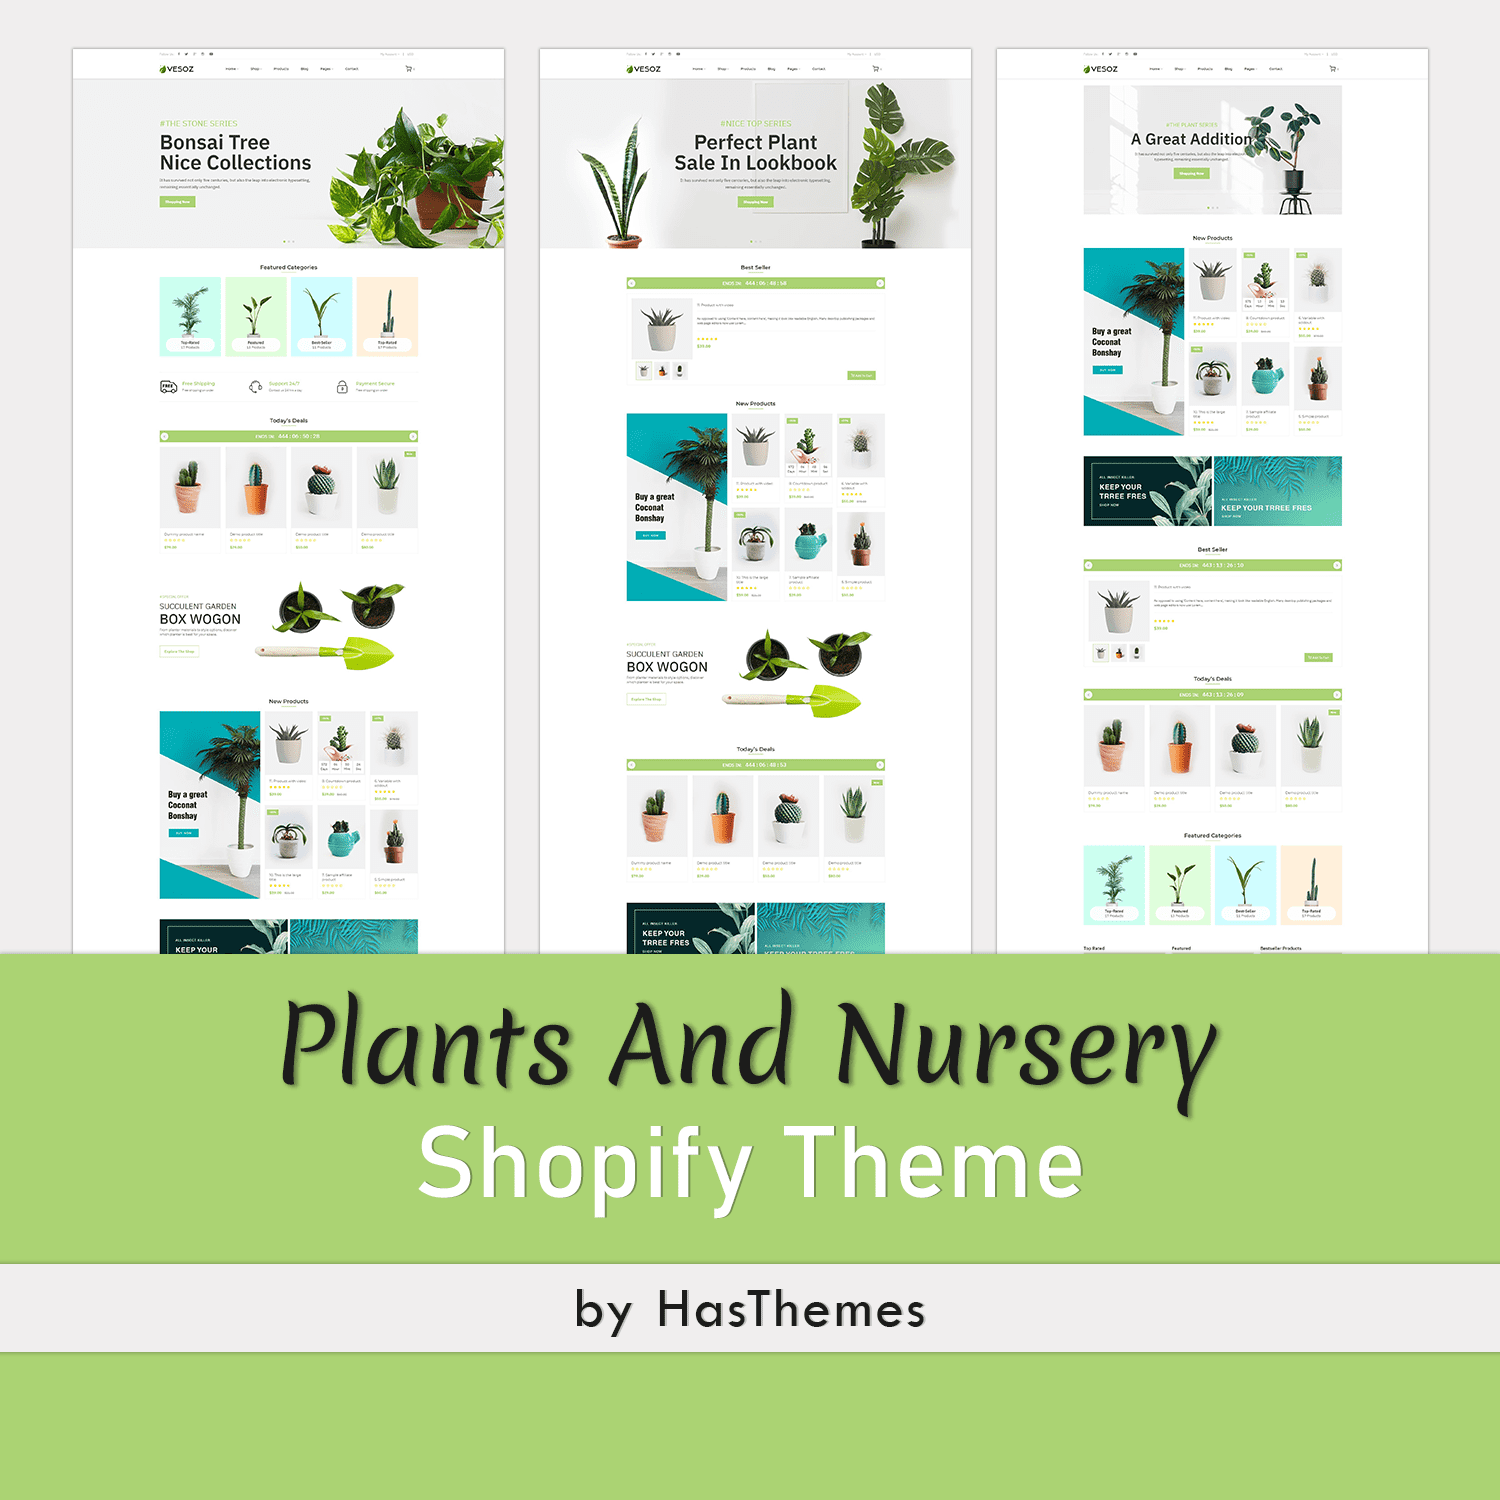 Plants And Nursery Shopify Theme cover.